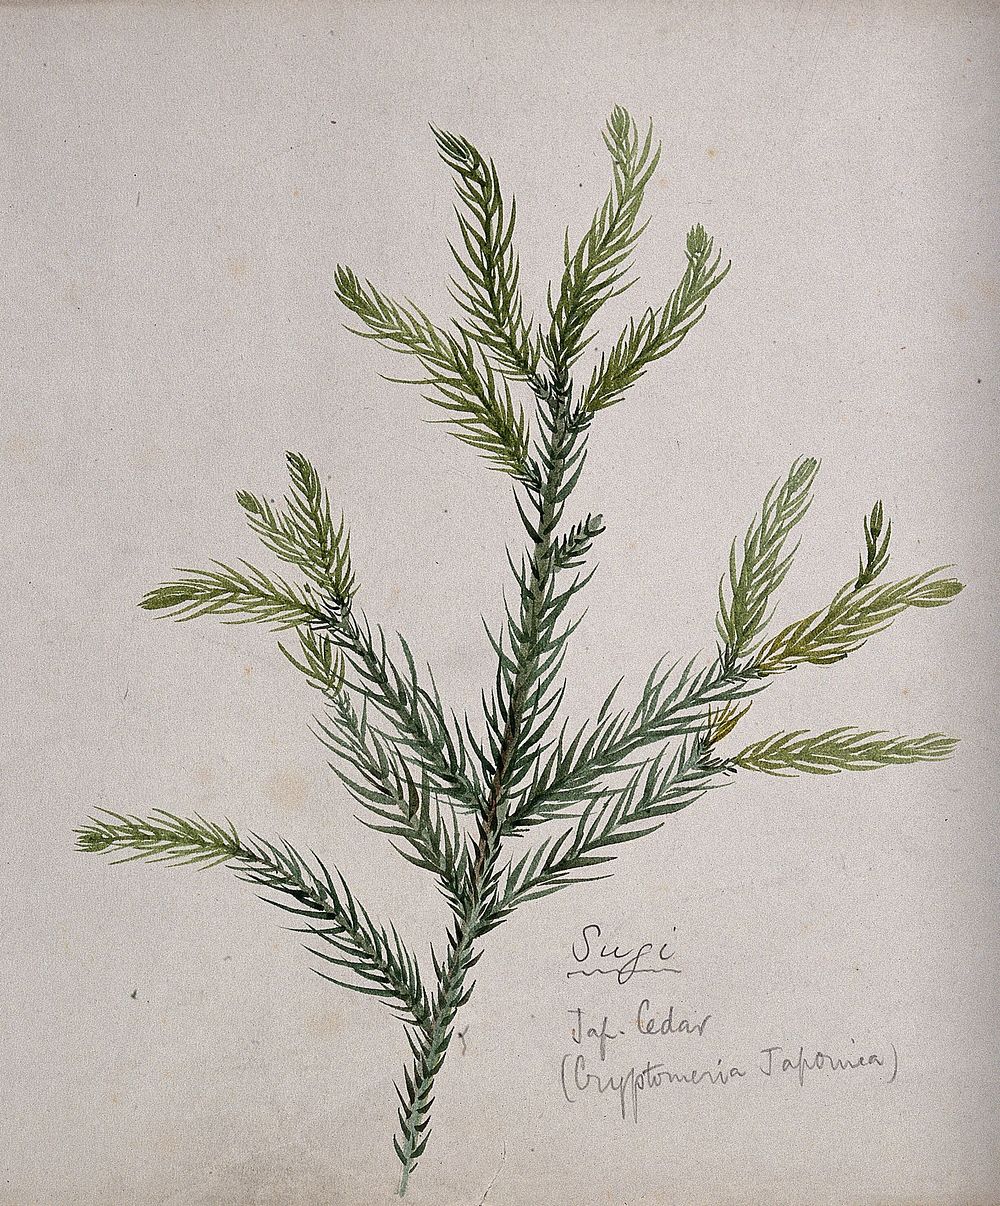 Japanese cedar (Cryptomeria japonica): branch with leaves. Watercolour by S. Kawano.